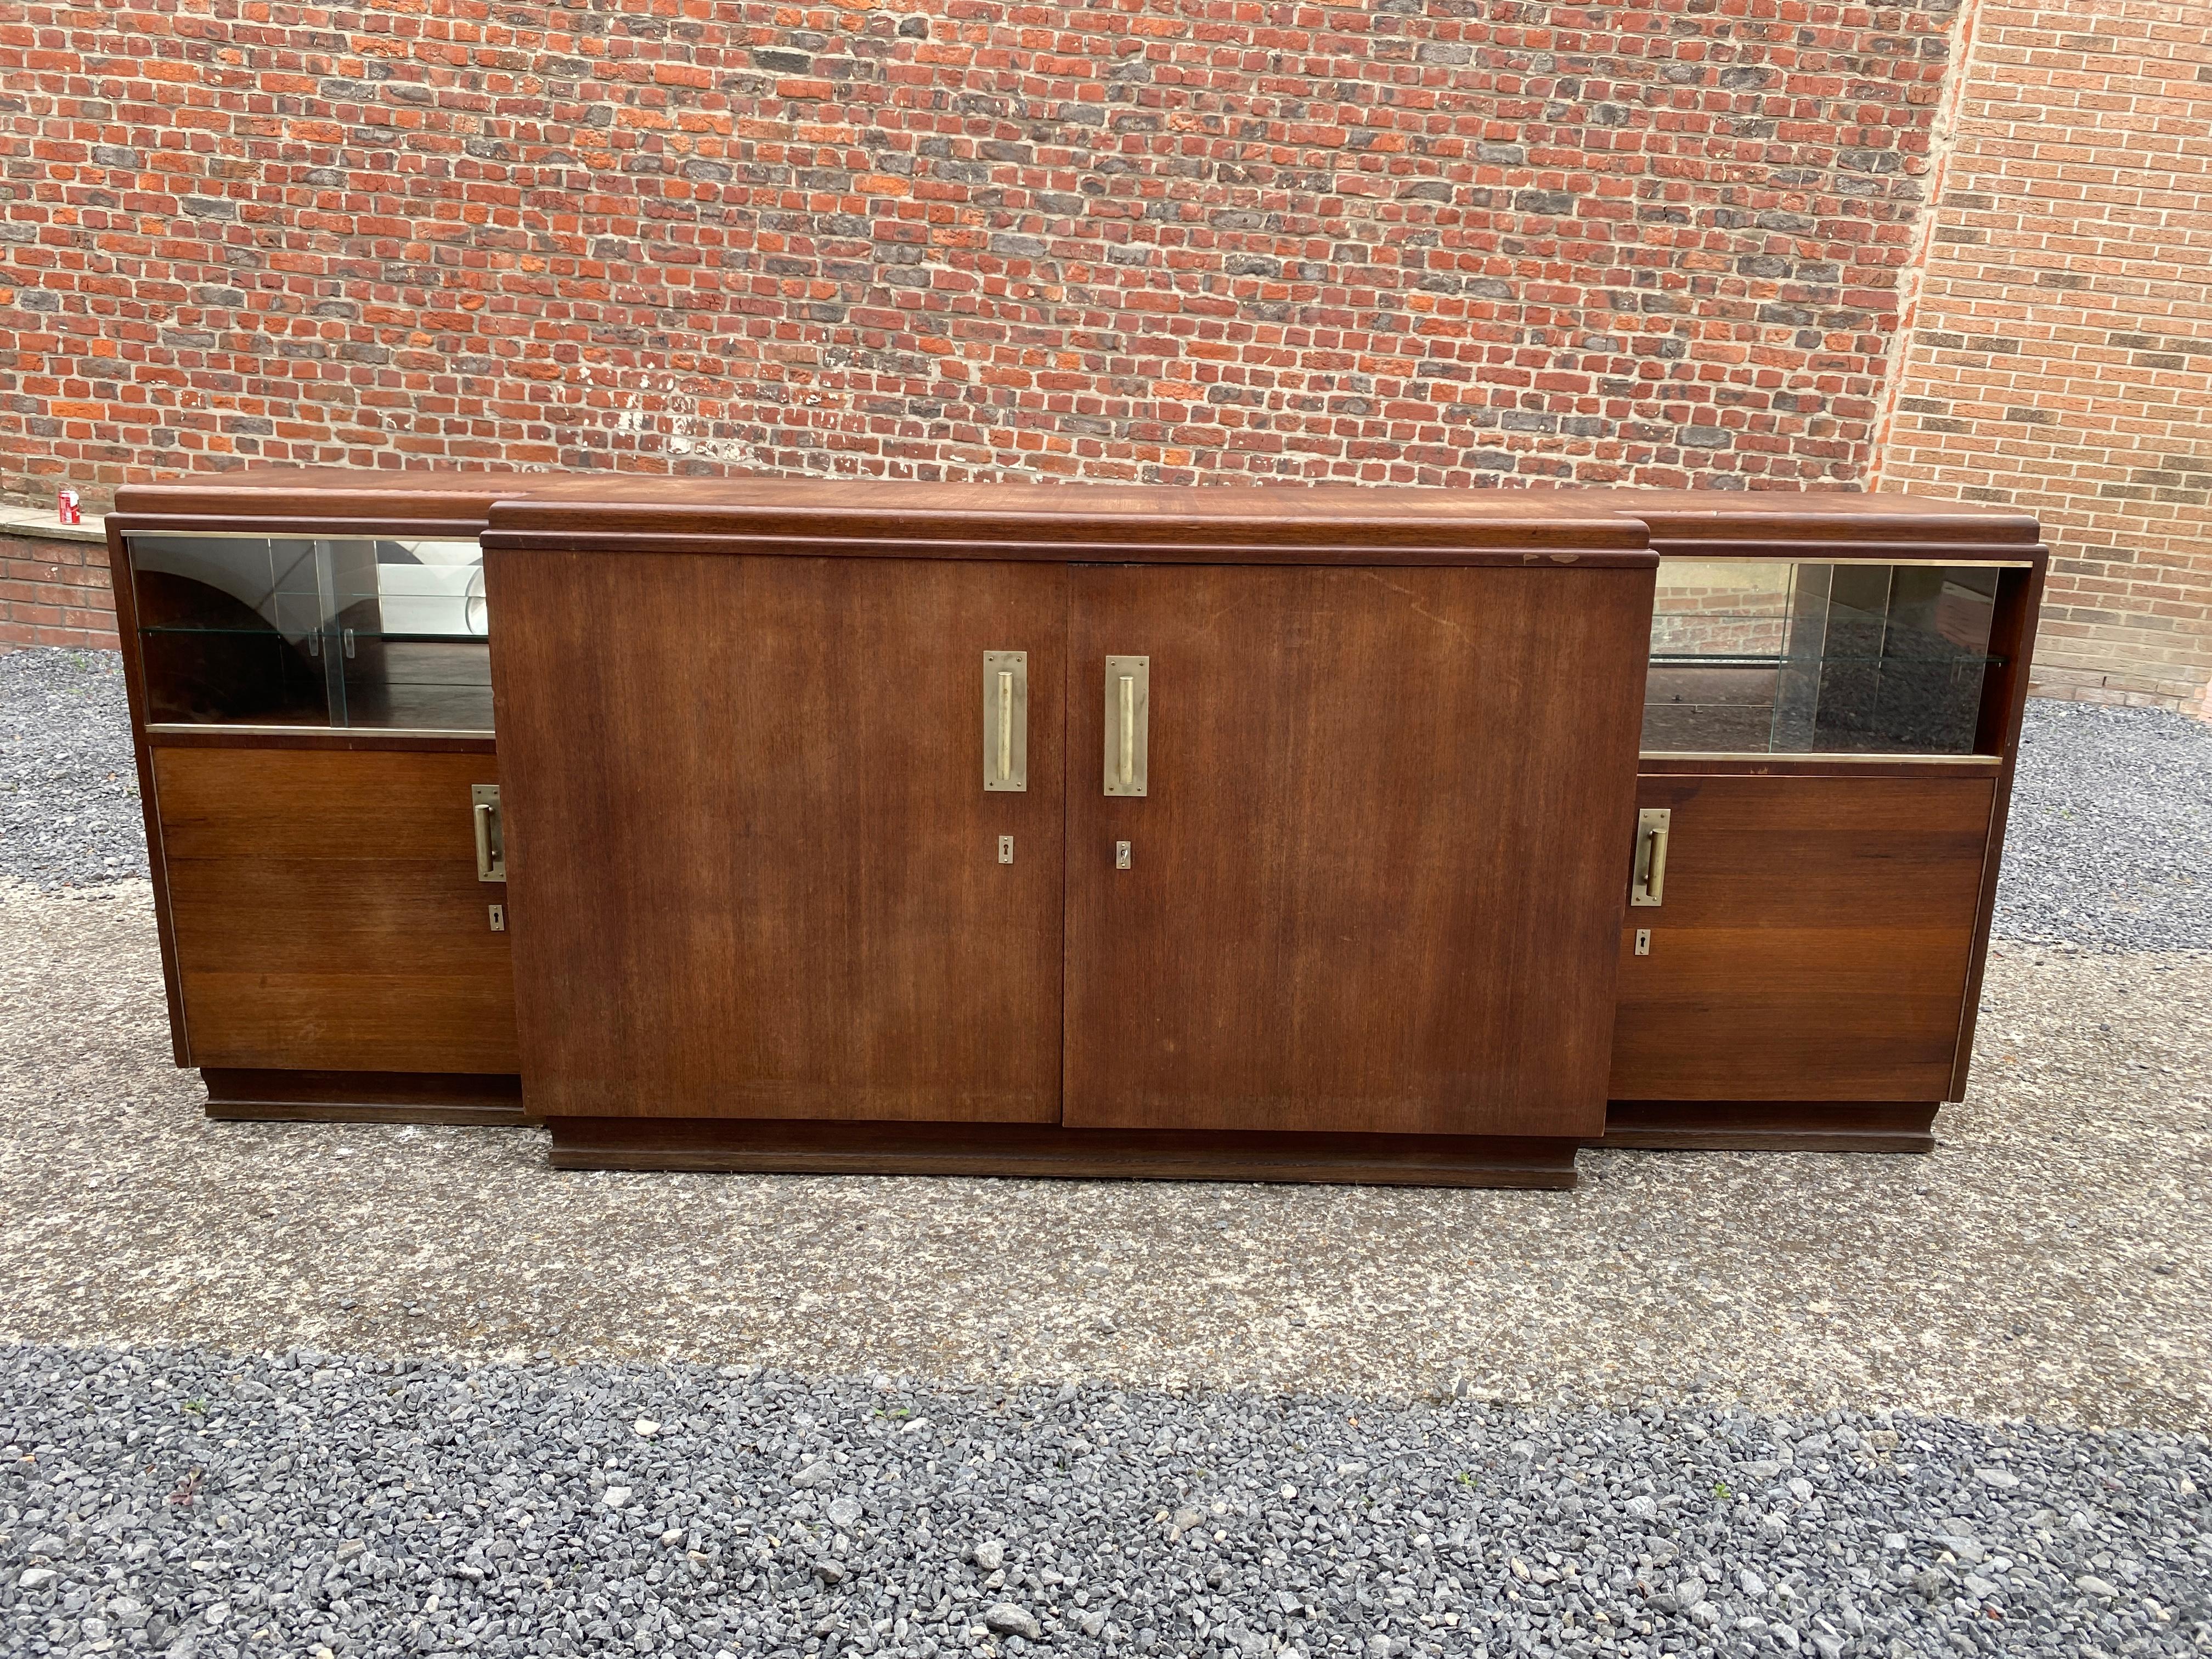 Large Art Deco sideboard in walnut, circa 1930.
the glass doors can be removed, the last photos show the sideboard with its niches without the windows.
  